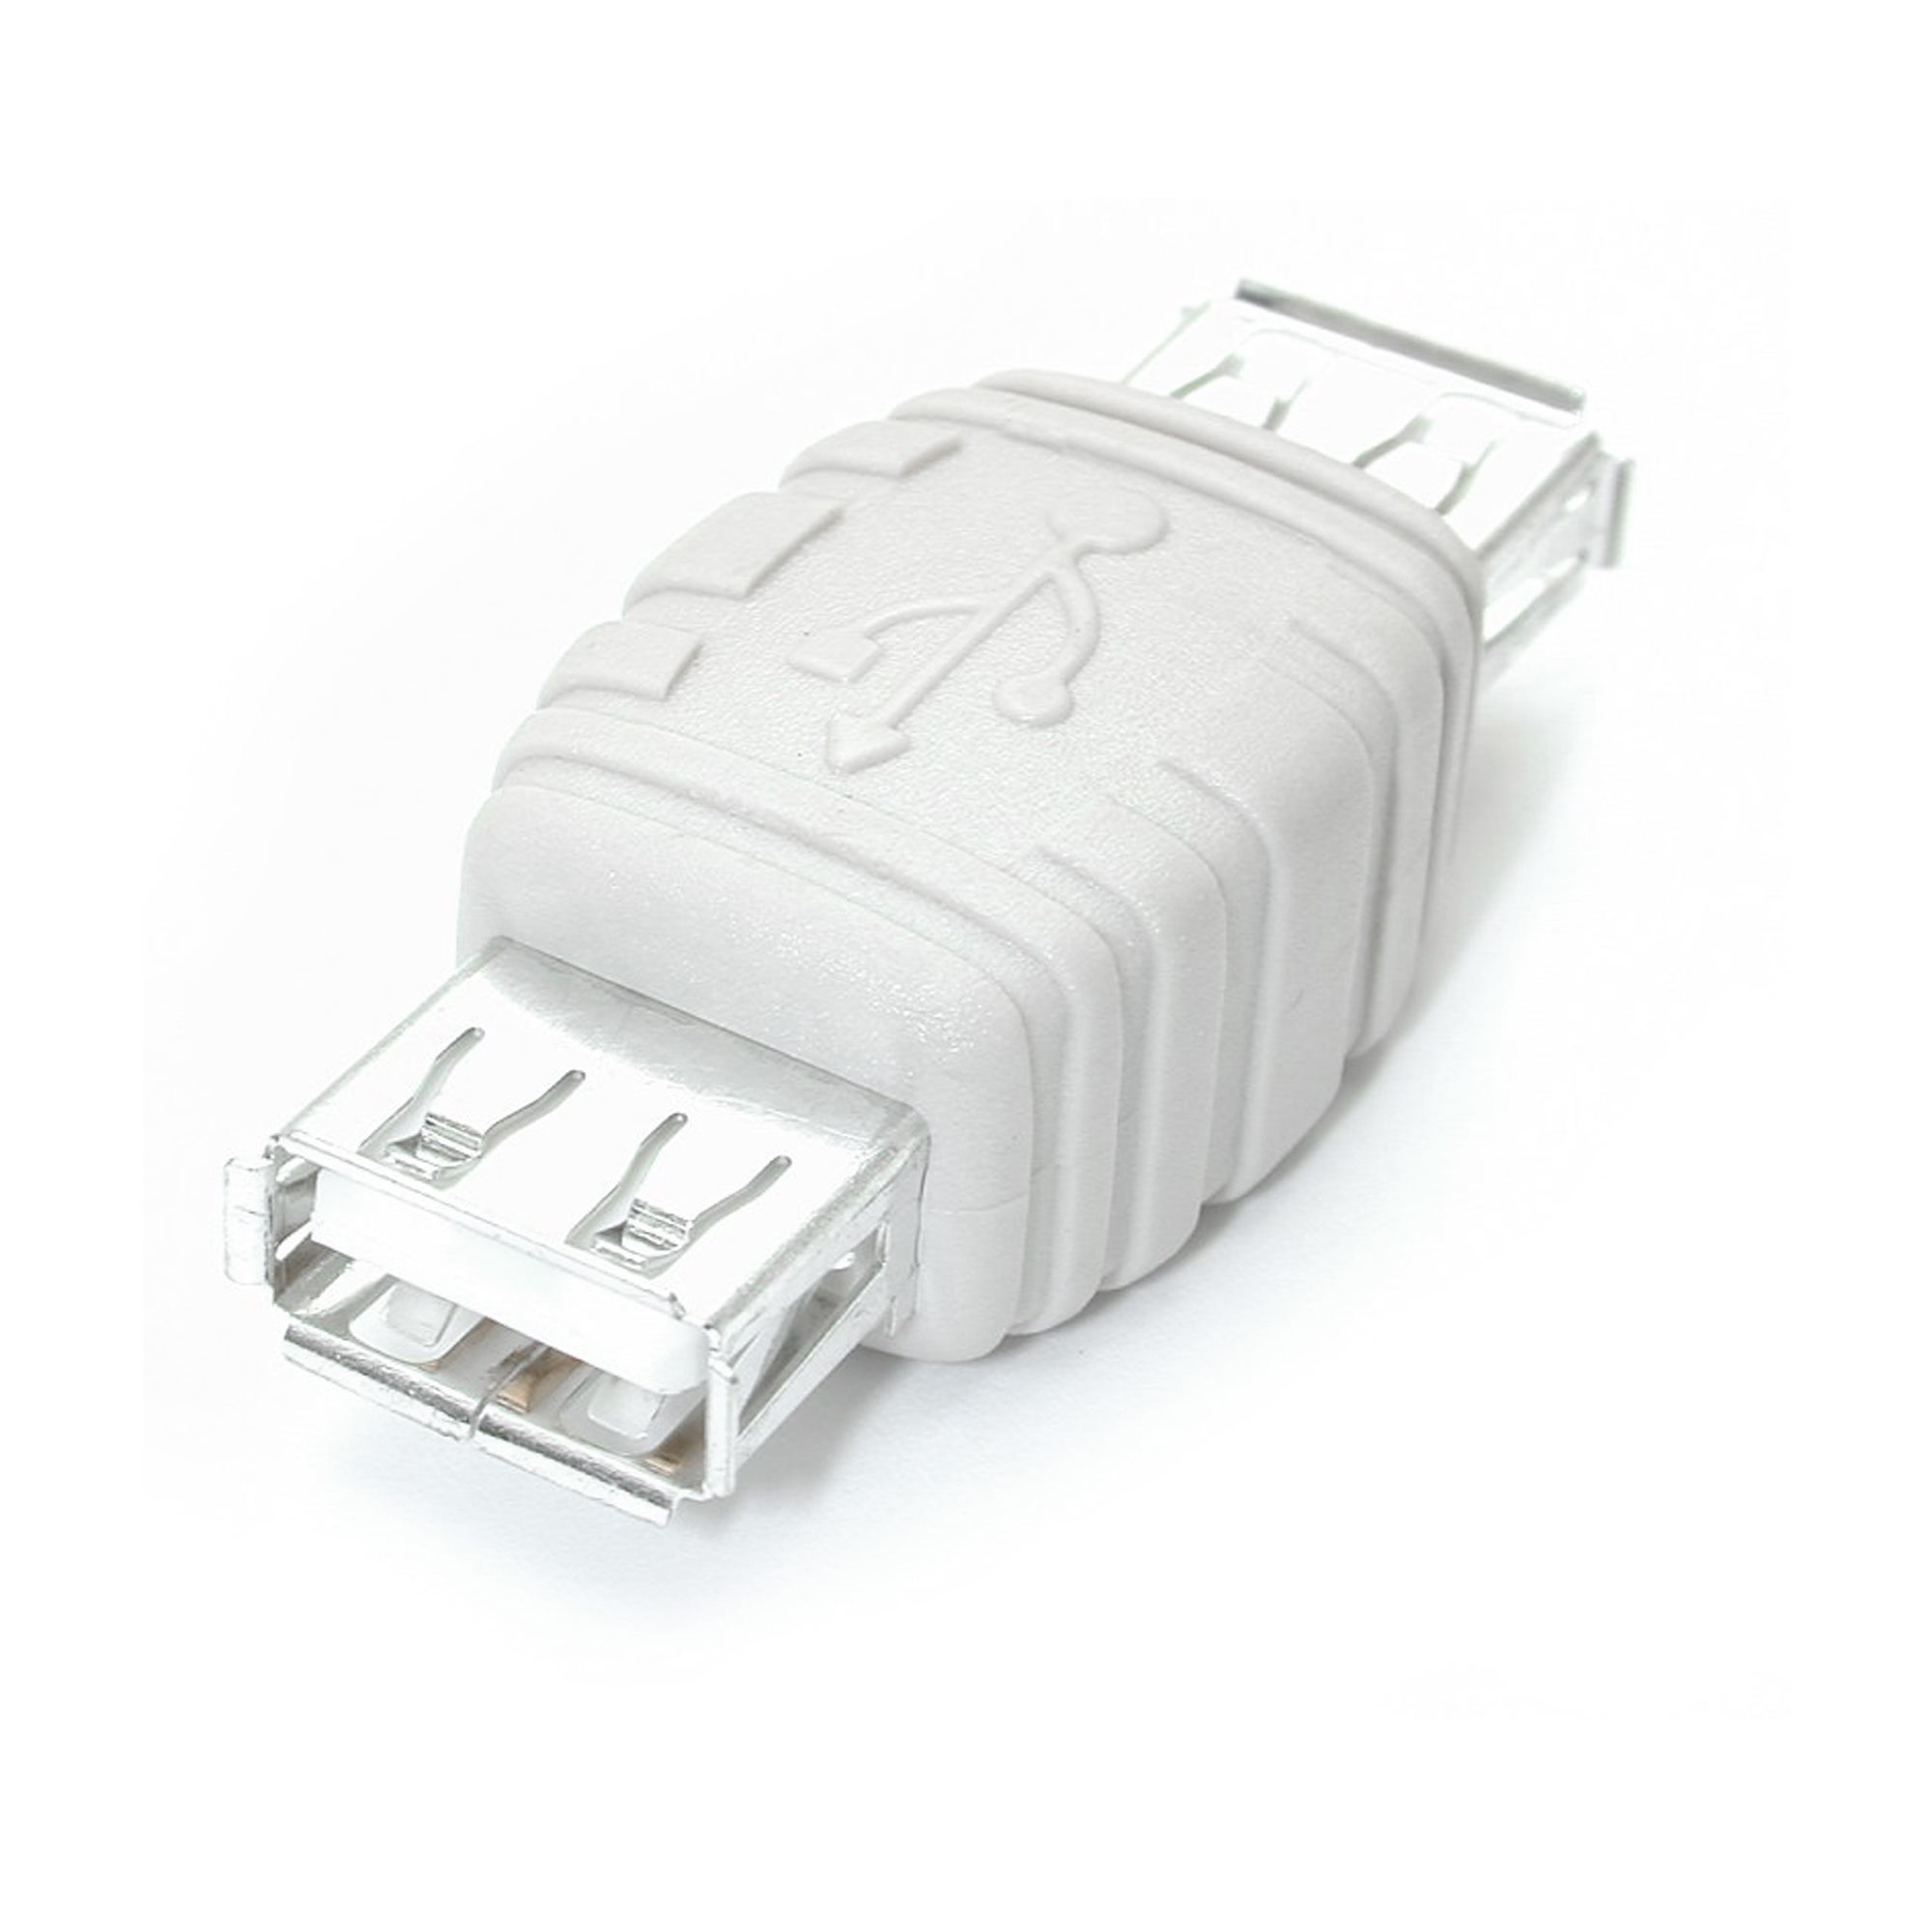 USB 2.0 Type A Female to Female Adapter  Coupler Gender Changer Connector EC 